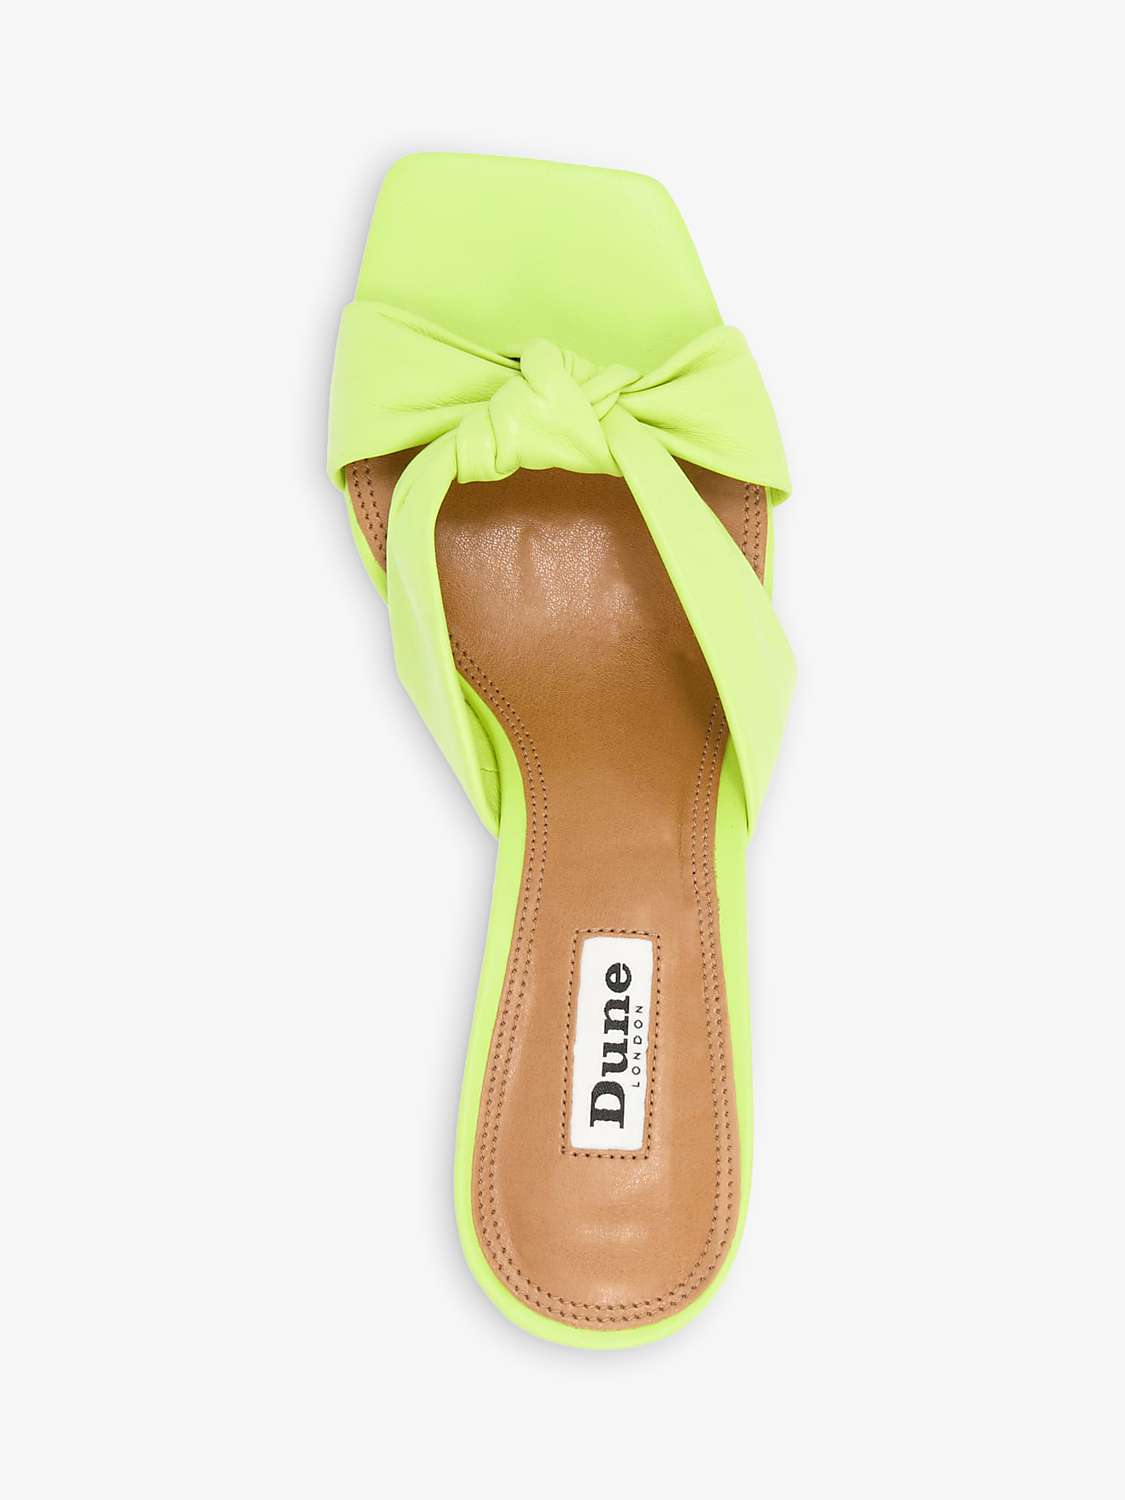 Buy Dune Maize Leather Mules Online at johnlewis.com